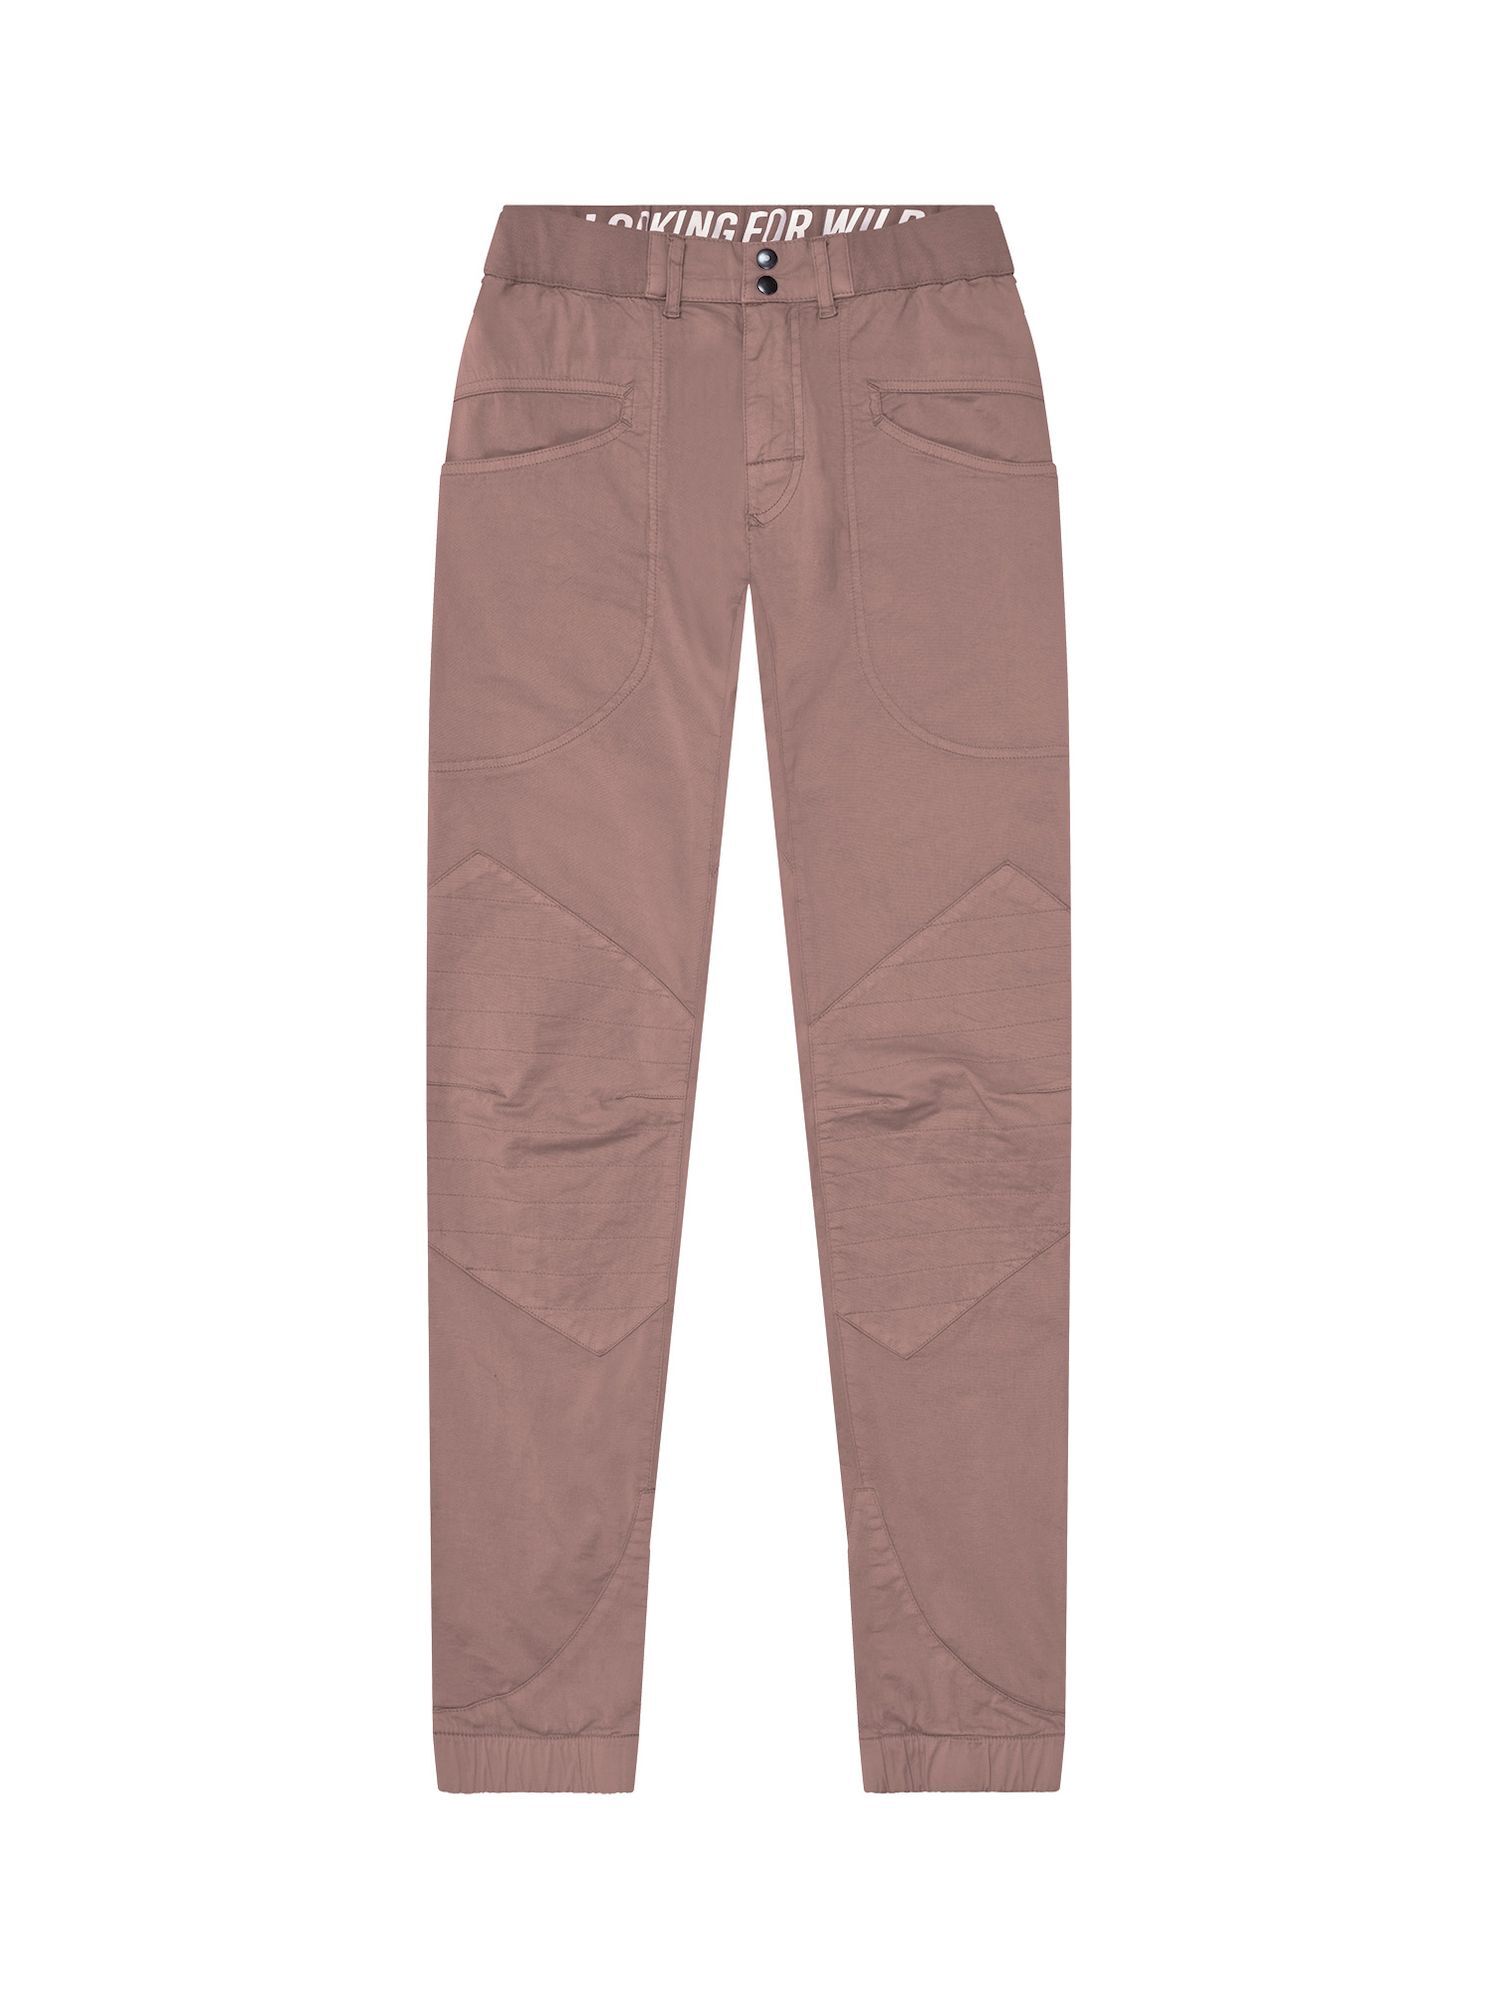 Looking For Wild Fitz Roy Pant - Climbing trousers - Men's